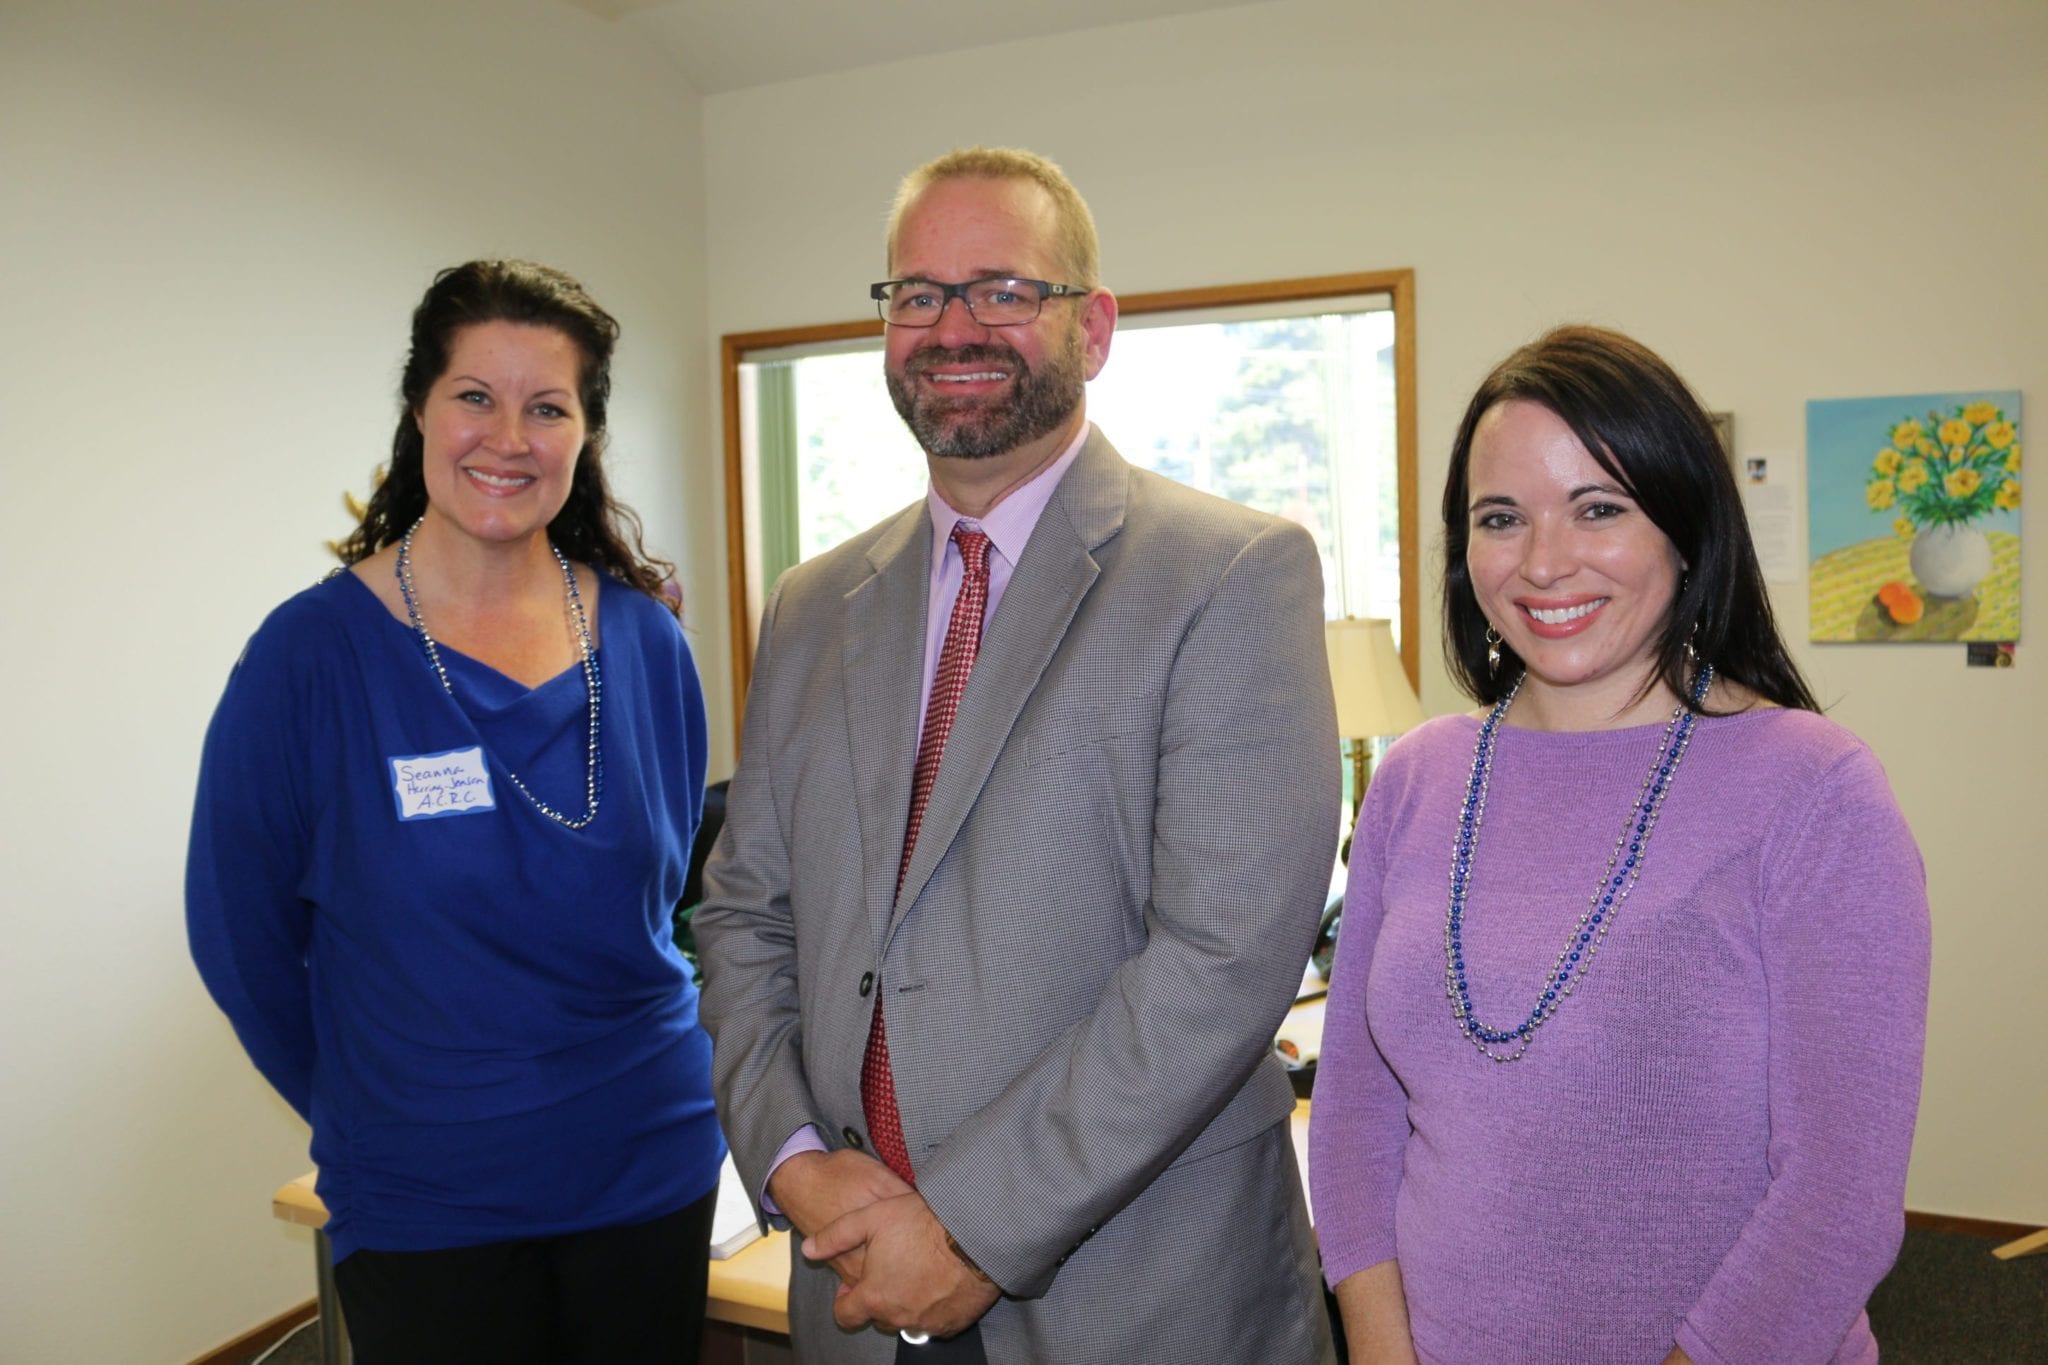 LCSNW staff and CEO present at the event discussed the future of the Arlington Community Resource Center. Left to right are Center Manager Seanna Herring-Jensen, CEO David Duea and Development Director Jaime Schilling.